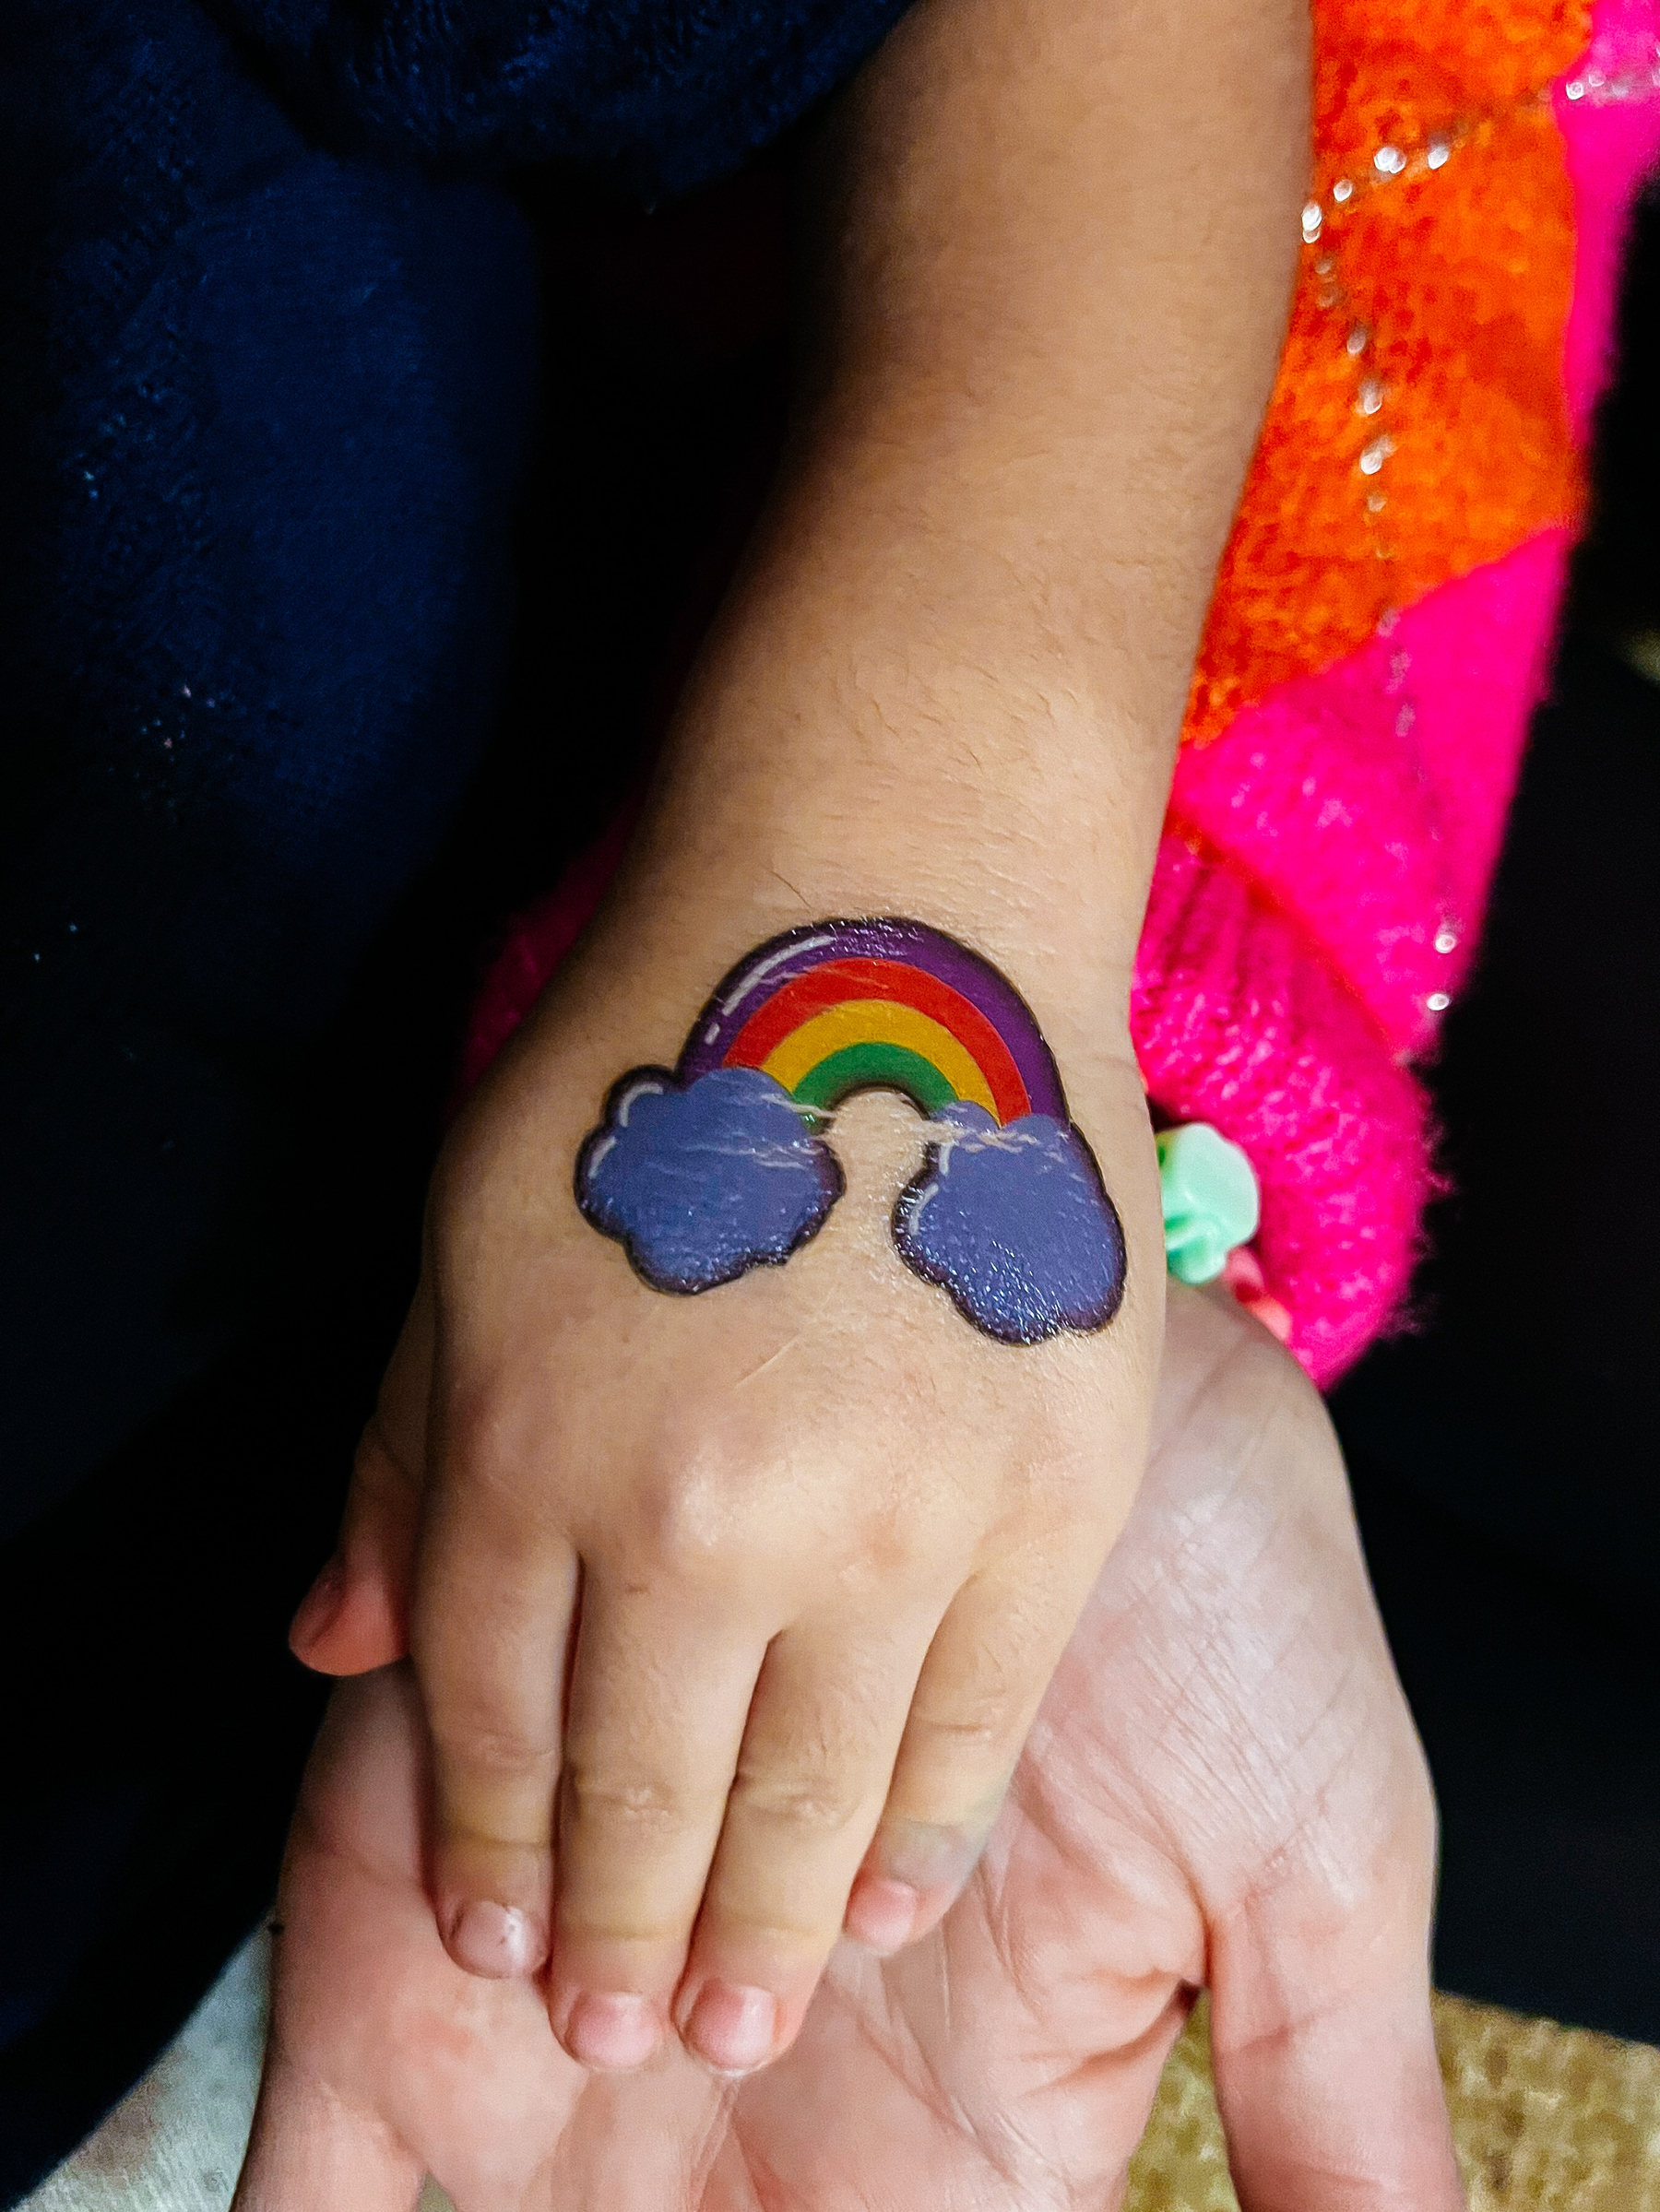 Temporary tattoo, a rainbow, in a child’s hand. 